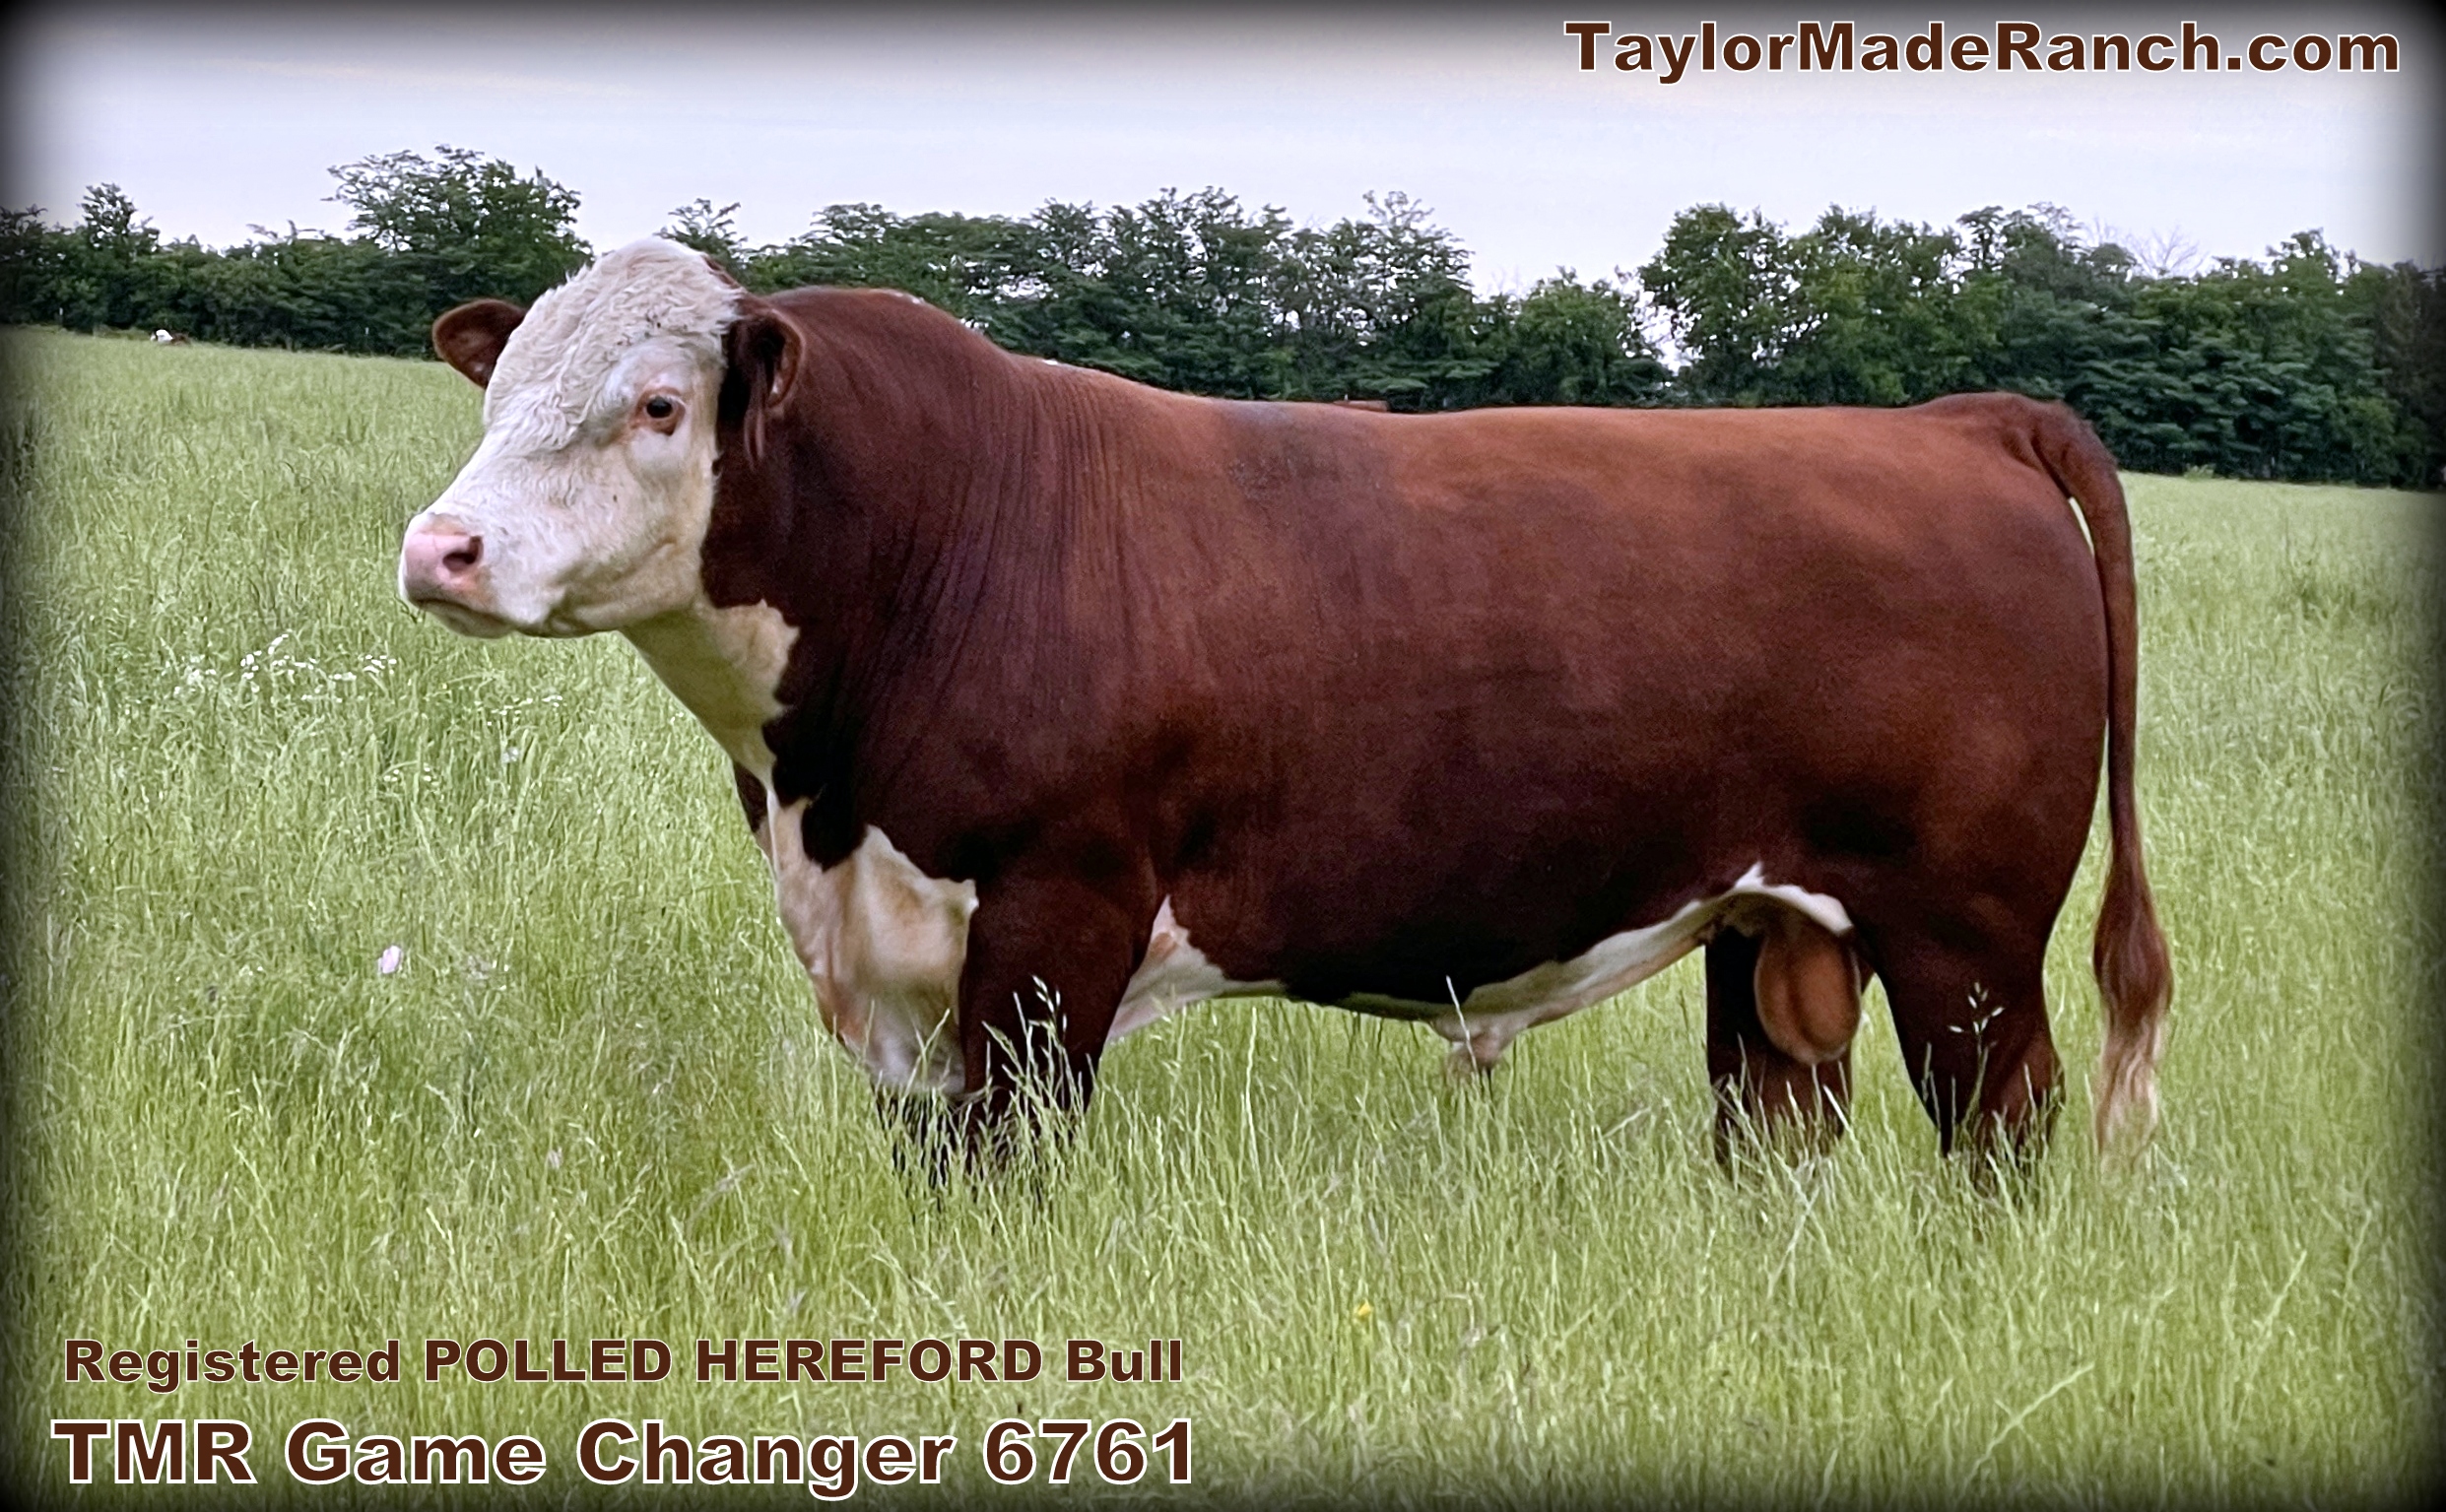 Registered Polled Hereford herd sire bull #167-61 - DOB 04-12-20in Northeast Texas #TaylorMadeRanch